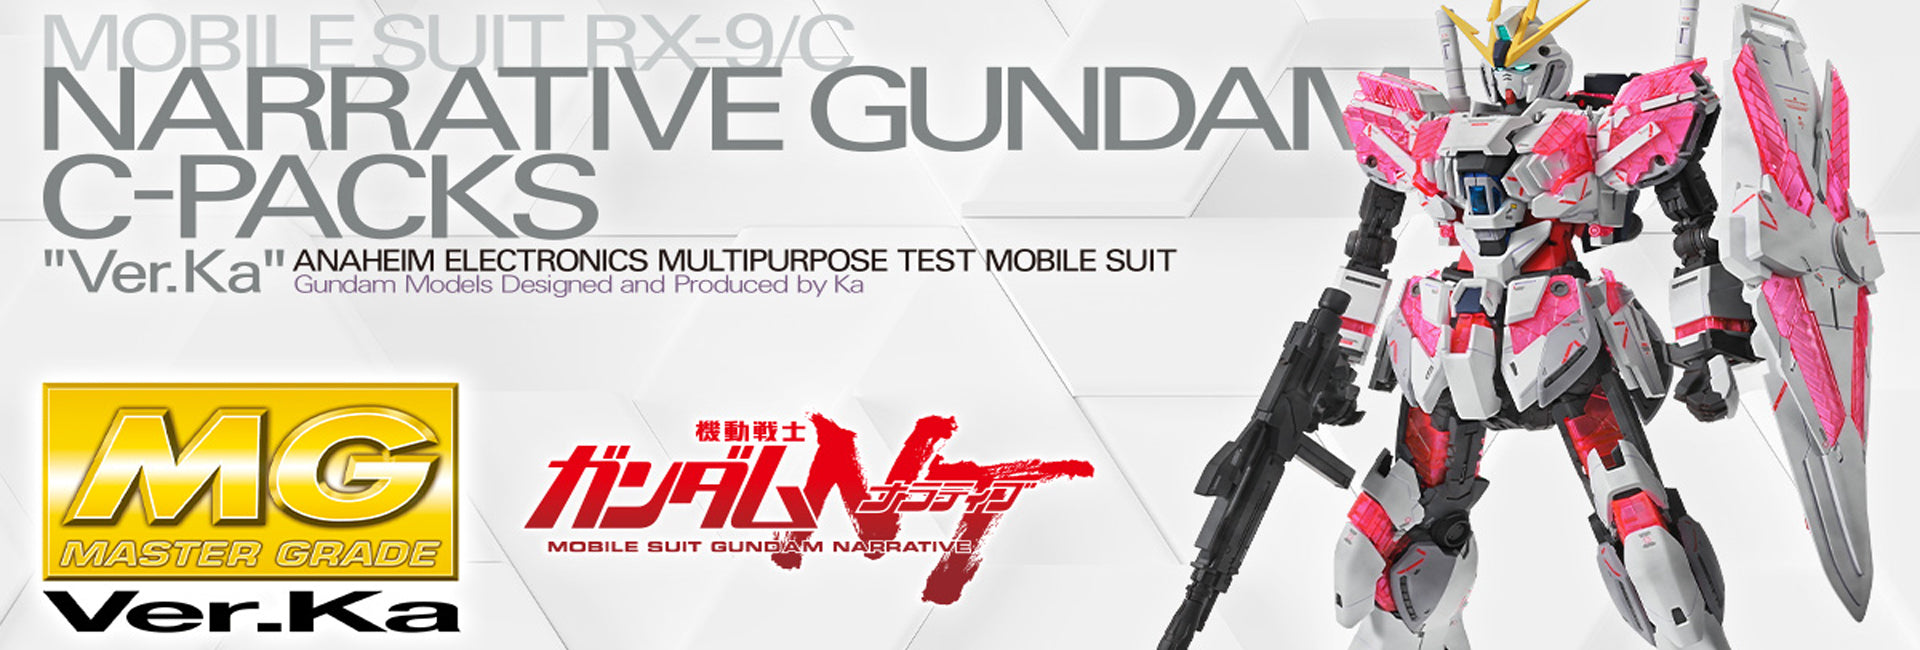 Gundam Planet - 30MM Armored Core VI: Fires of Rubicon Weapon Set 01